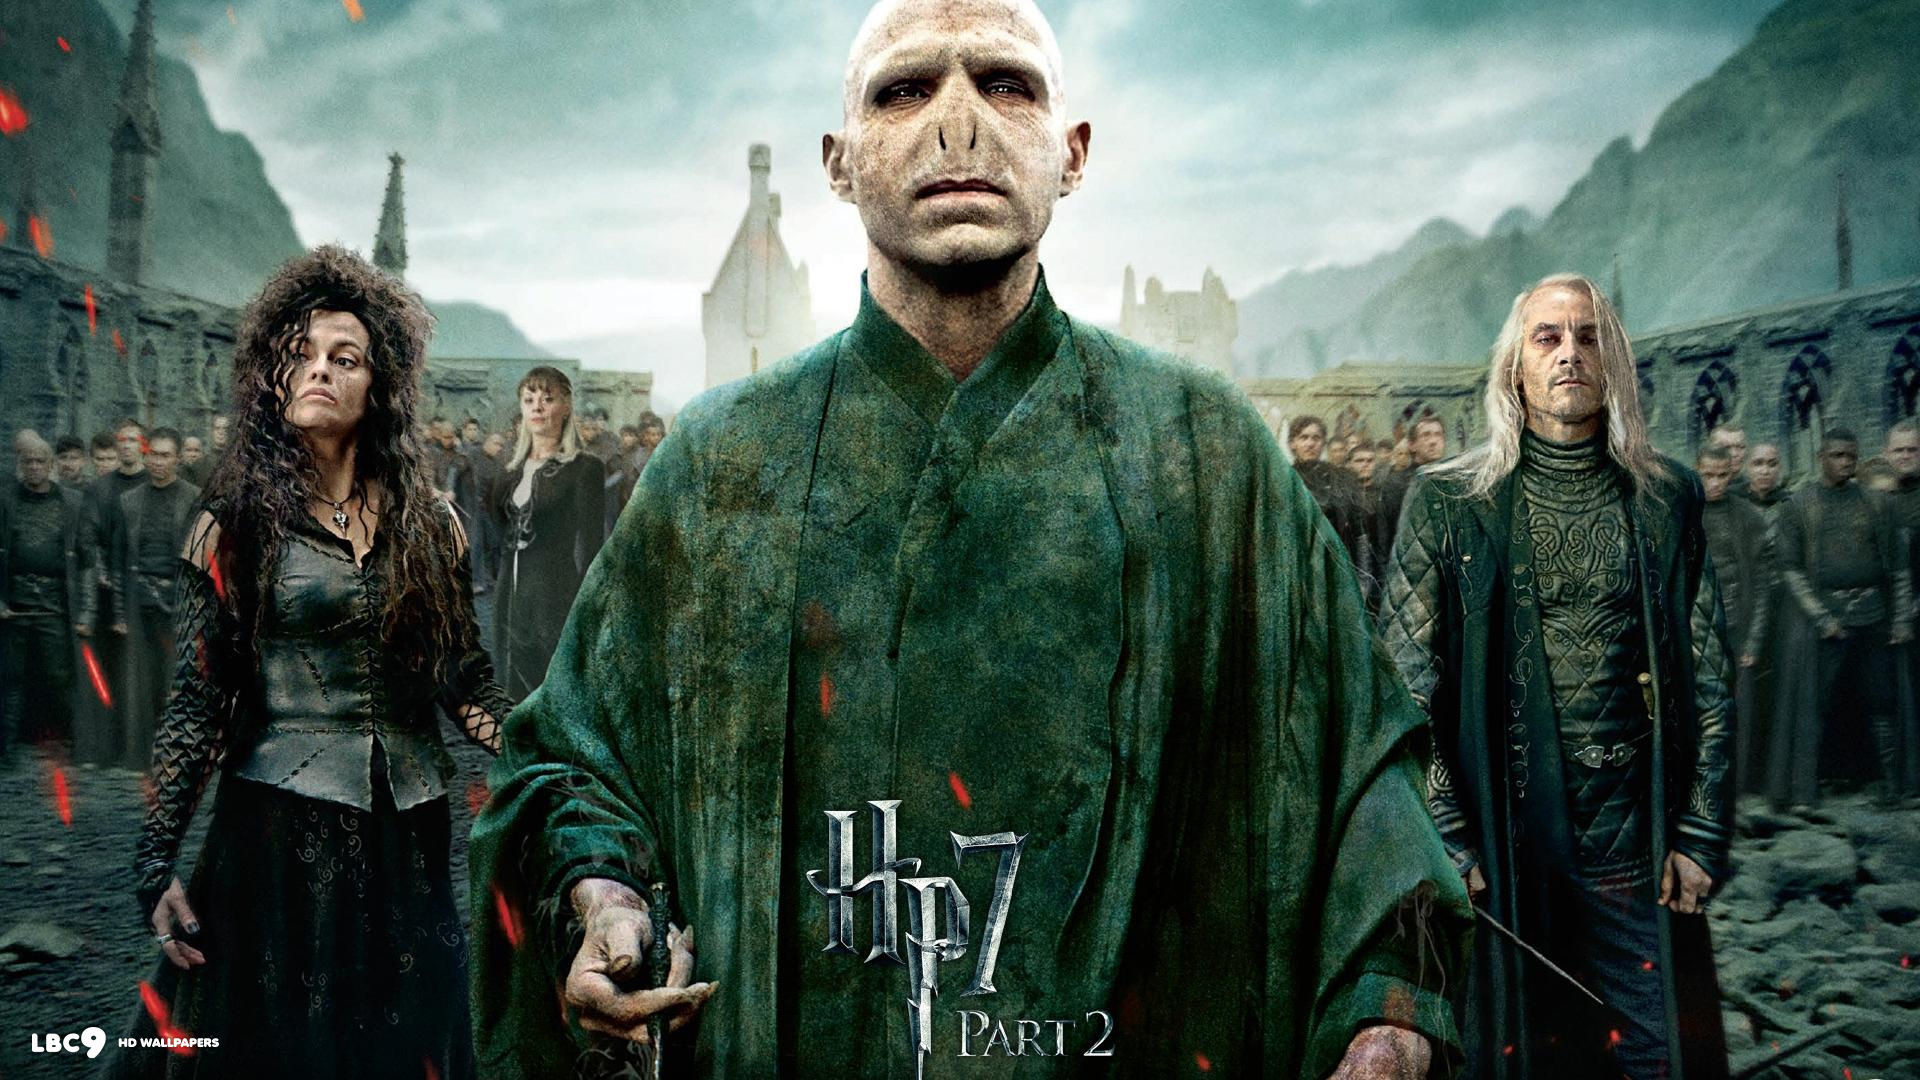 Harry potter and the deathly hallows part 2 10 1080p